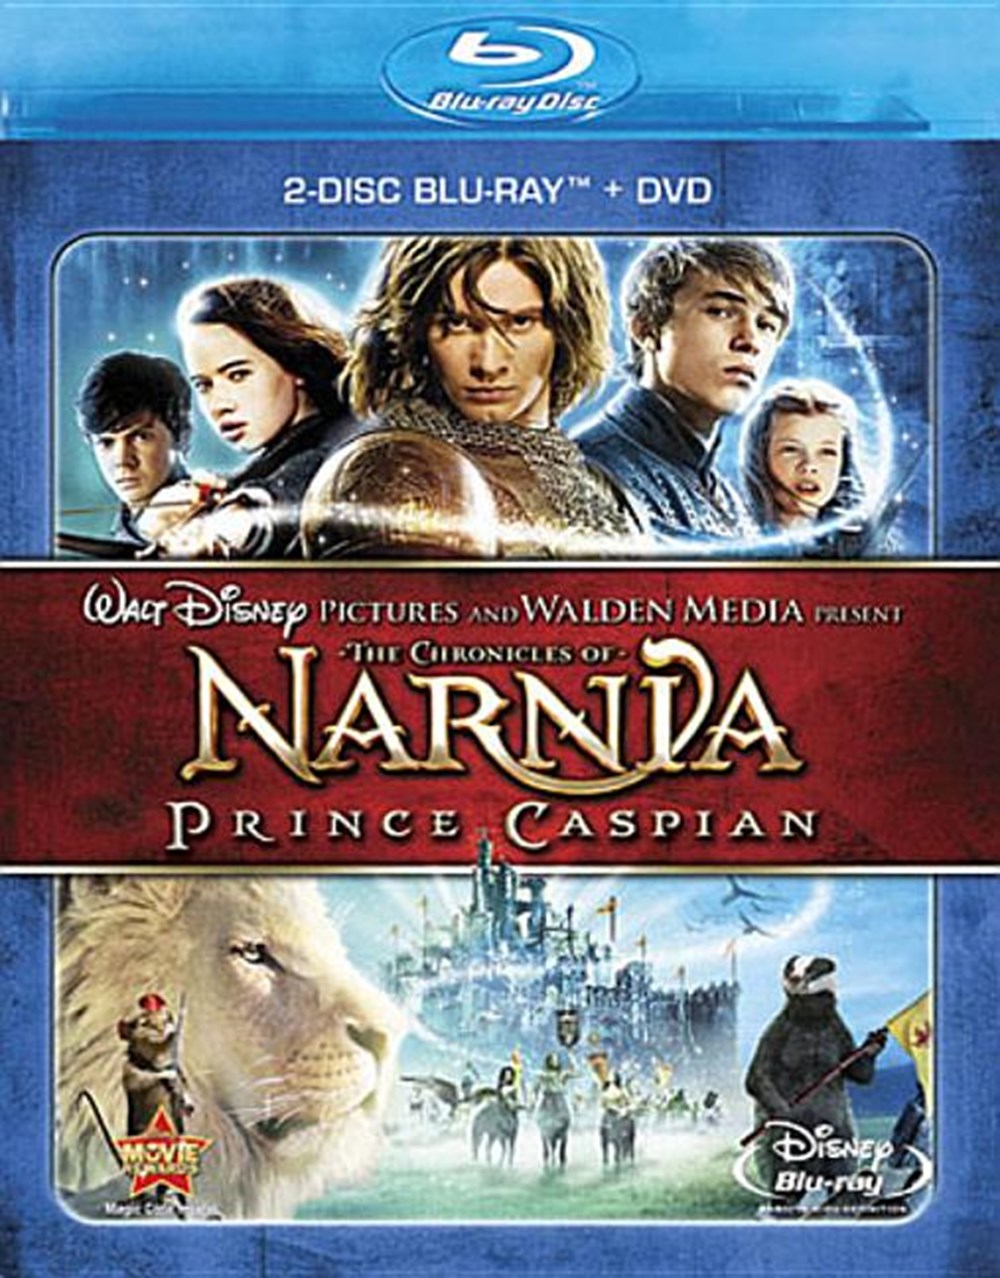 Chronicles of Narnia Prince Caspian (DVD Included)